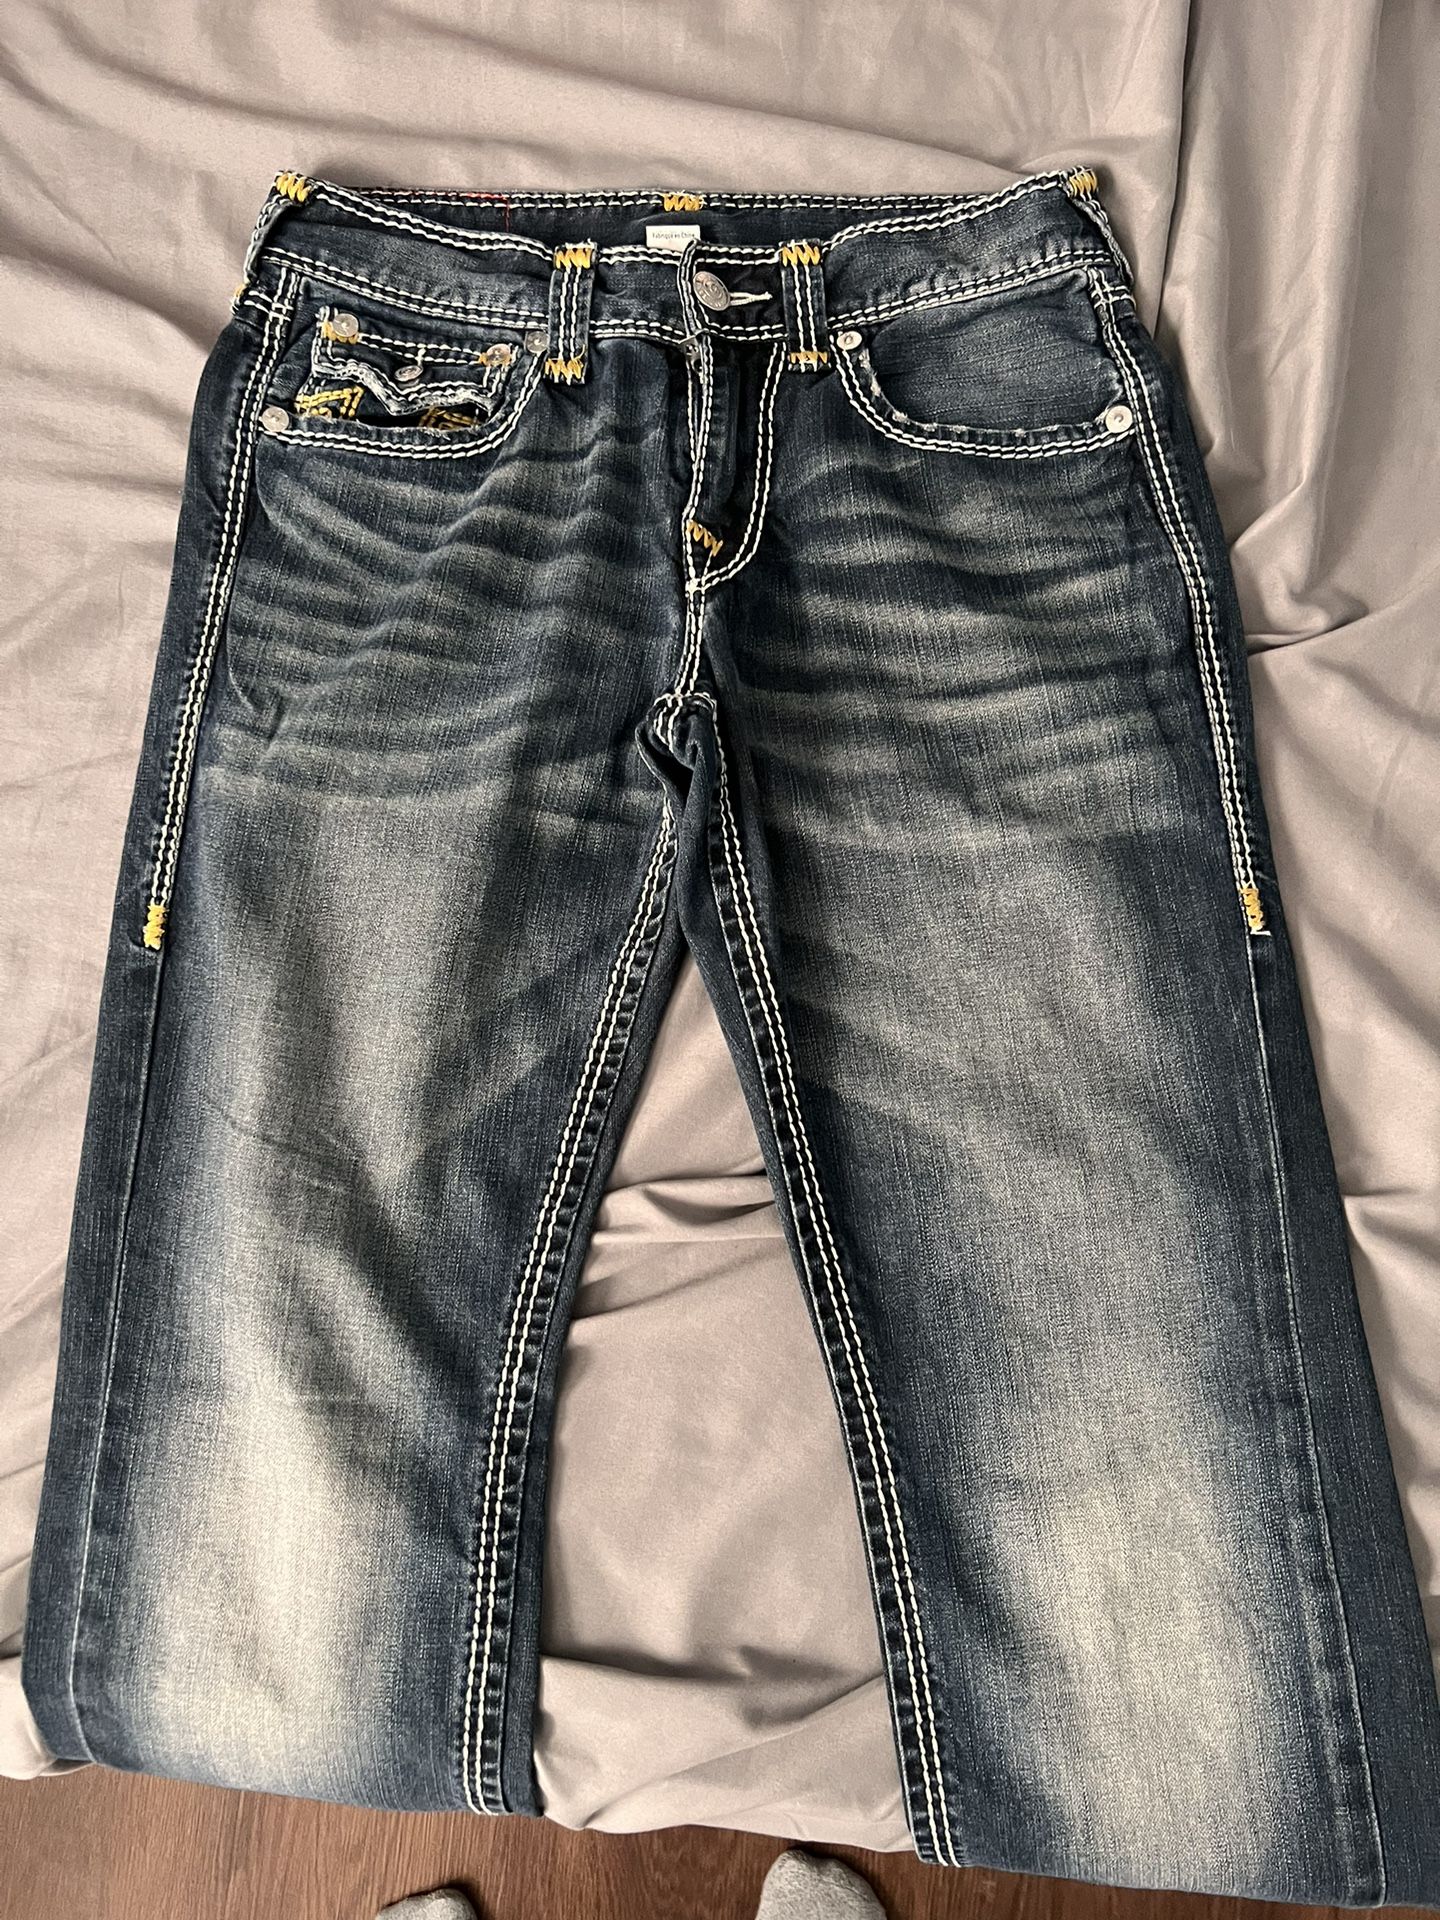 True Religion Jeans And Levi 501